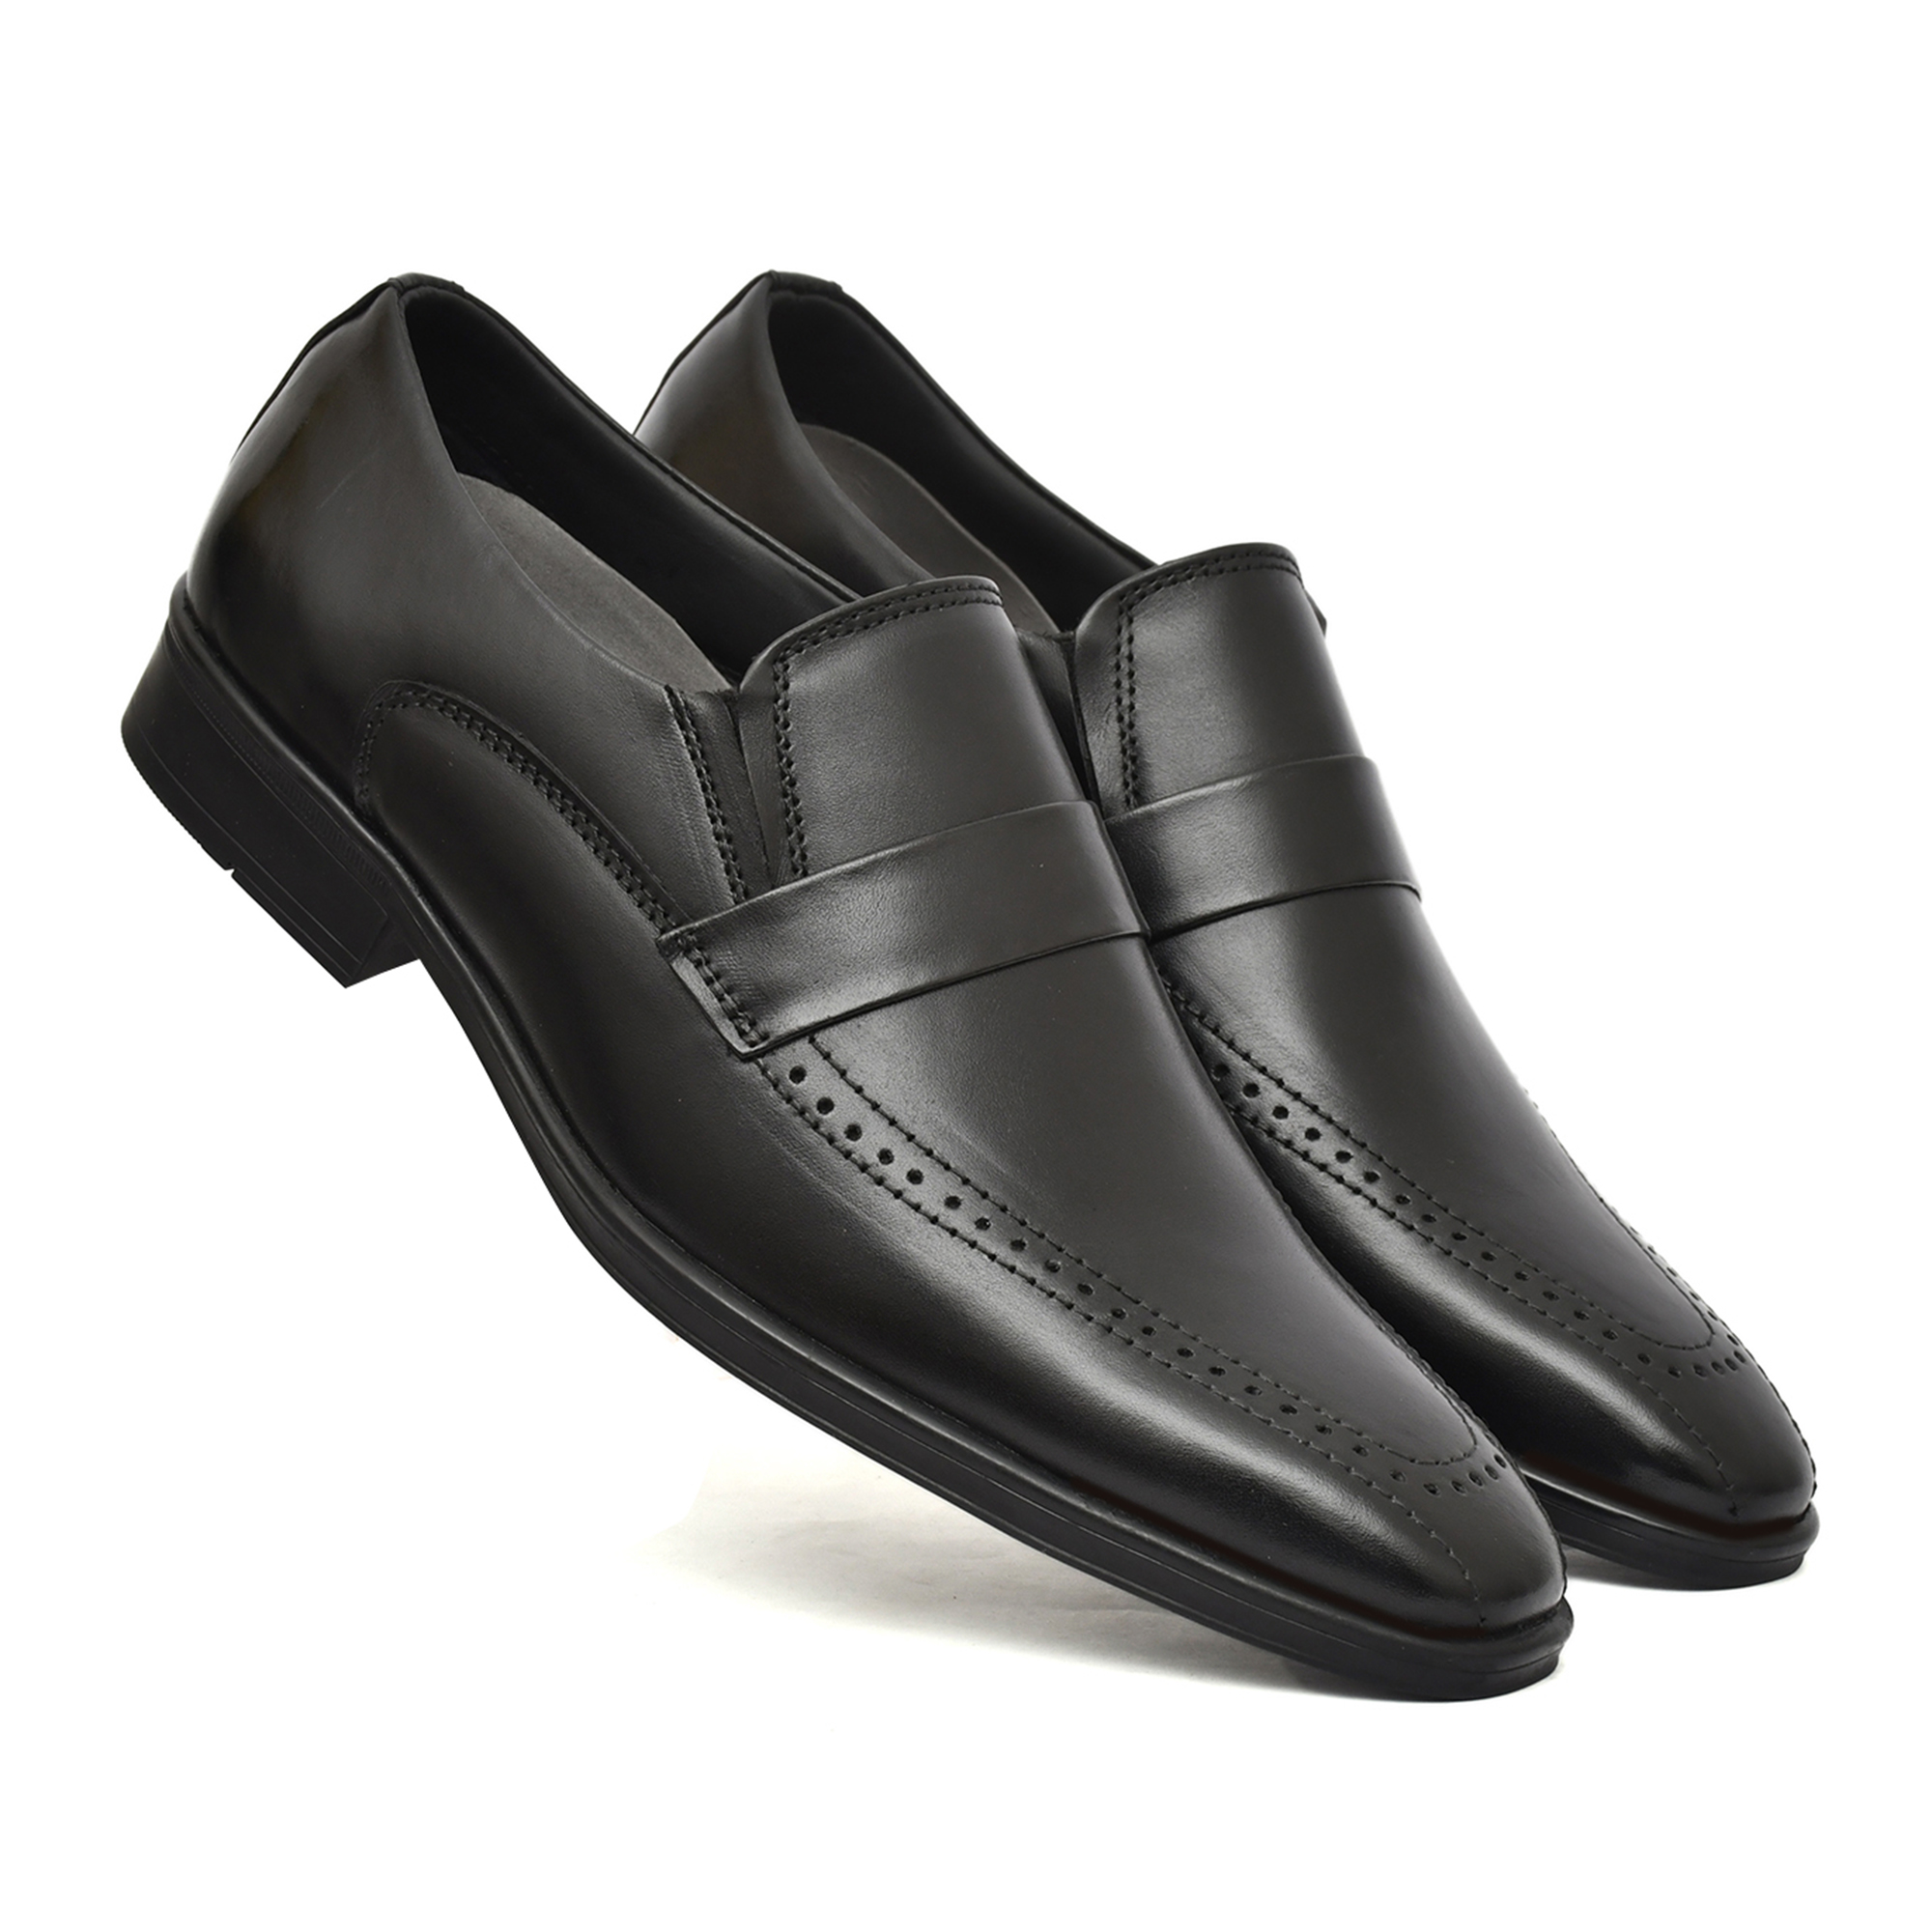 leather penny loafers for Men with Memory foam footpad by asm.